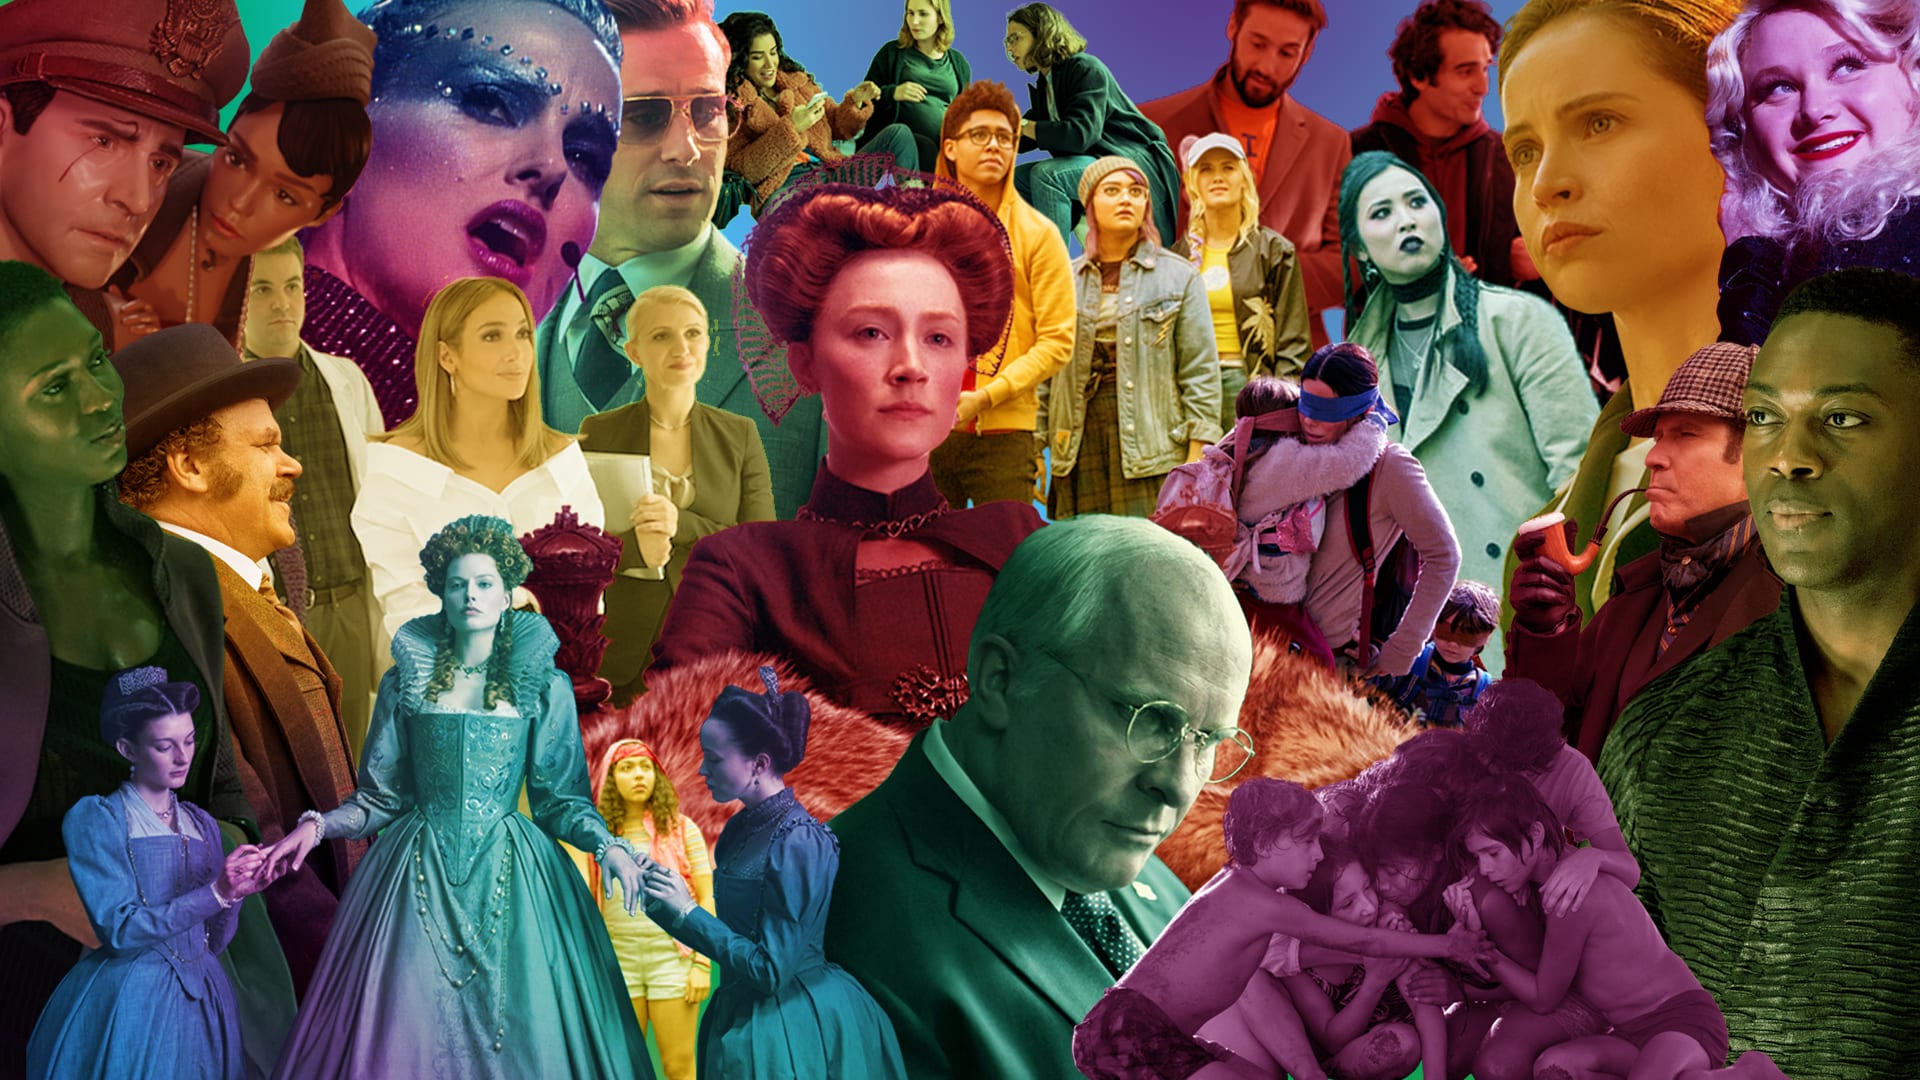 55 new movies, TV shows, albums, and books you must check out this month